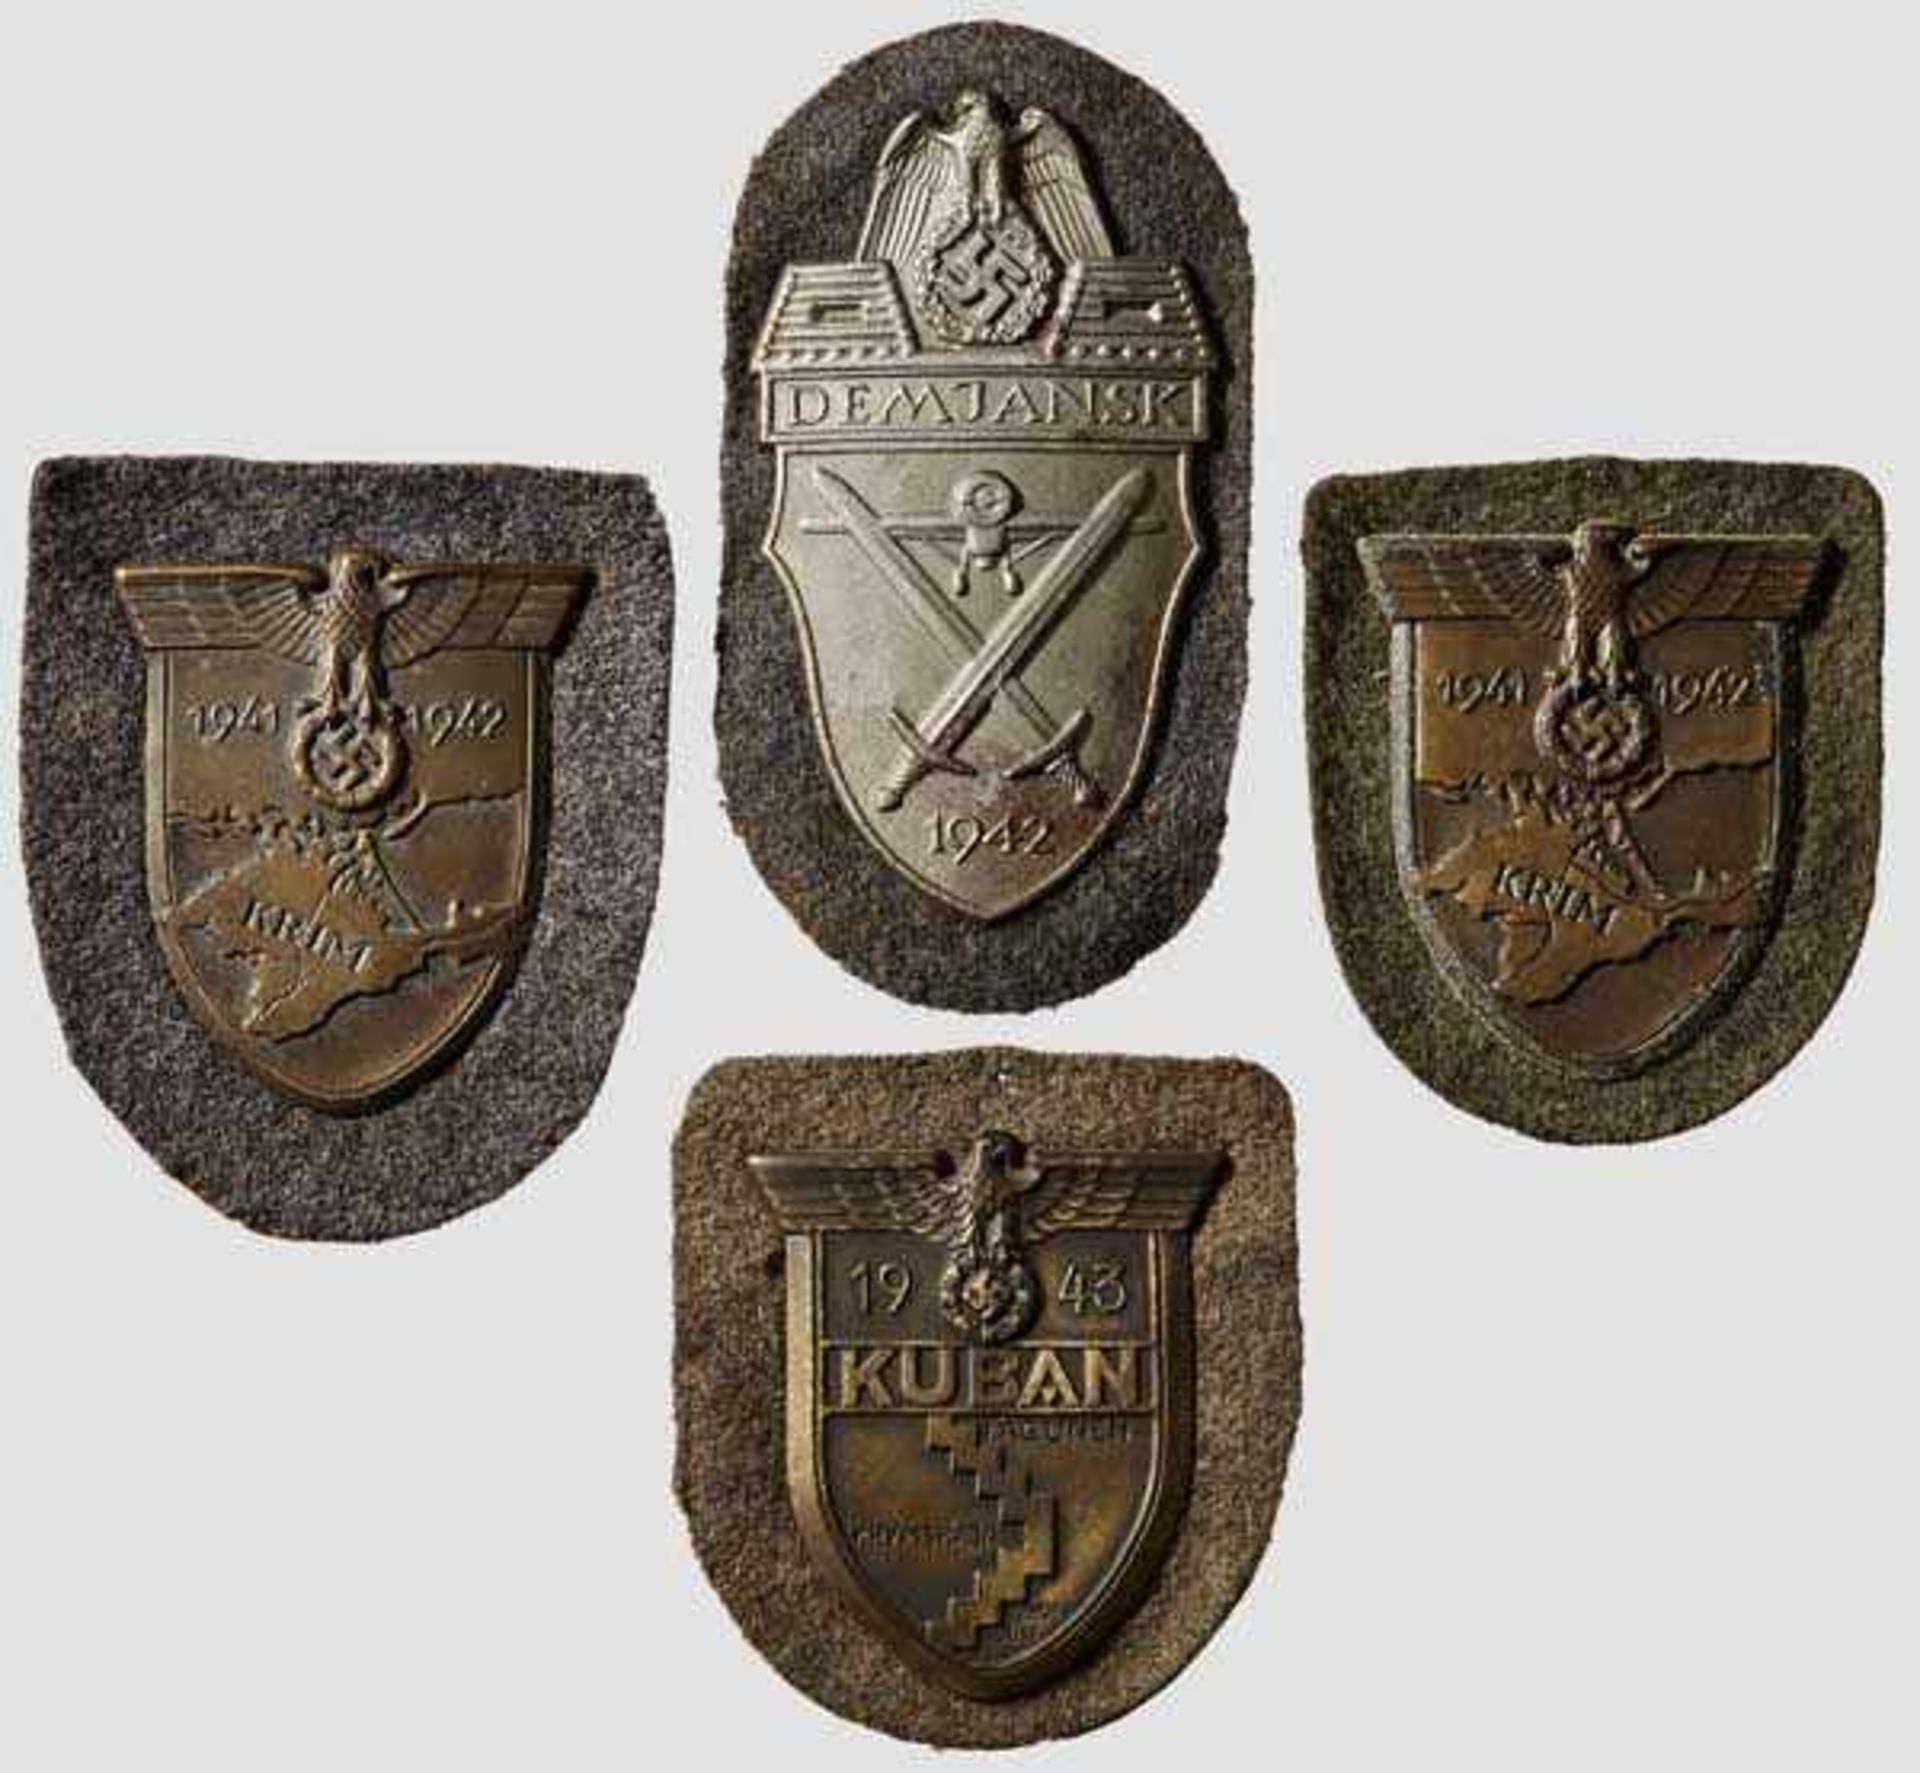 Four Campaign Shields Sleeve shields {Kuban{, {Demjansk{ and two {Krim{. All on field gray army